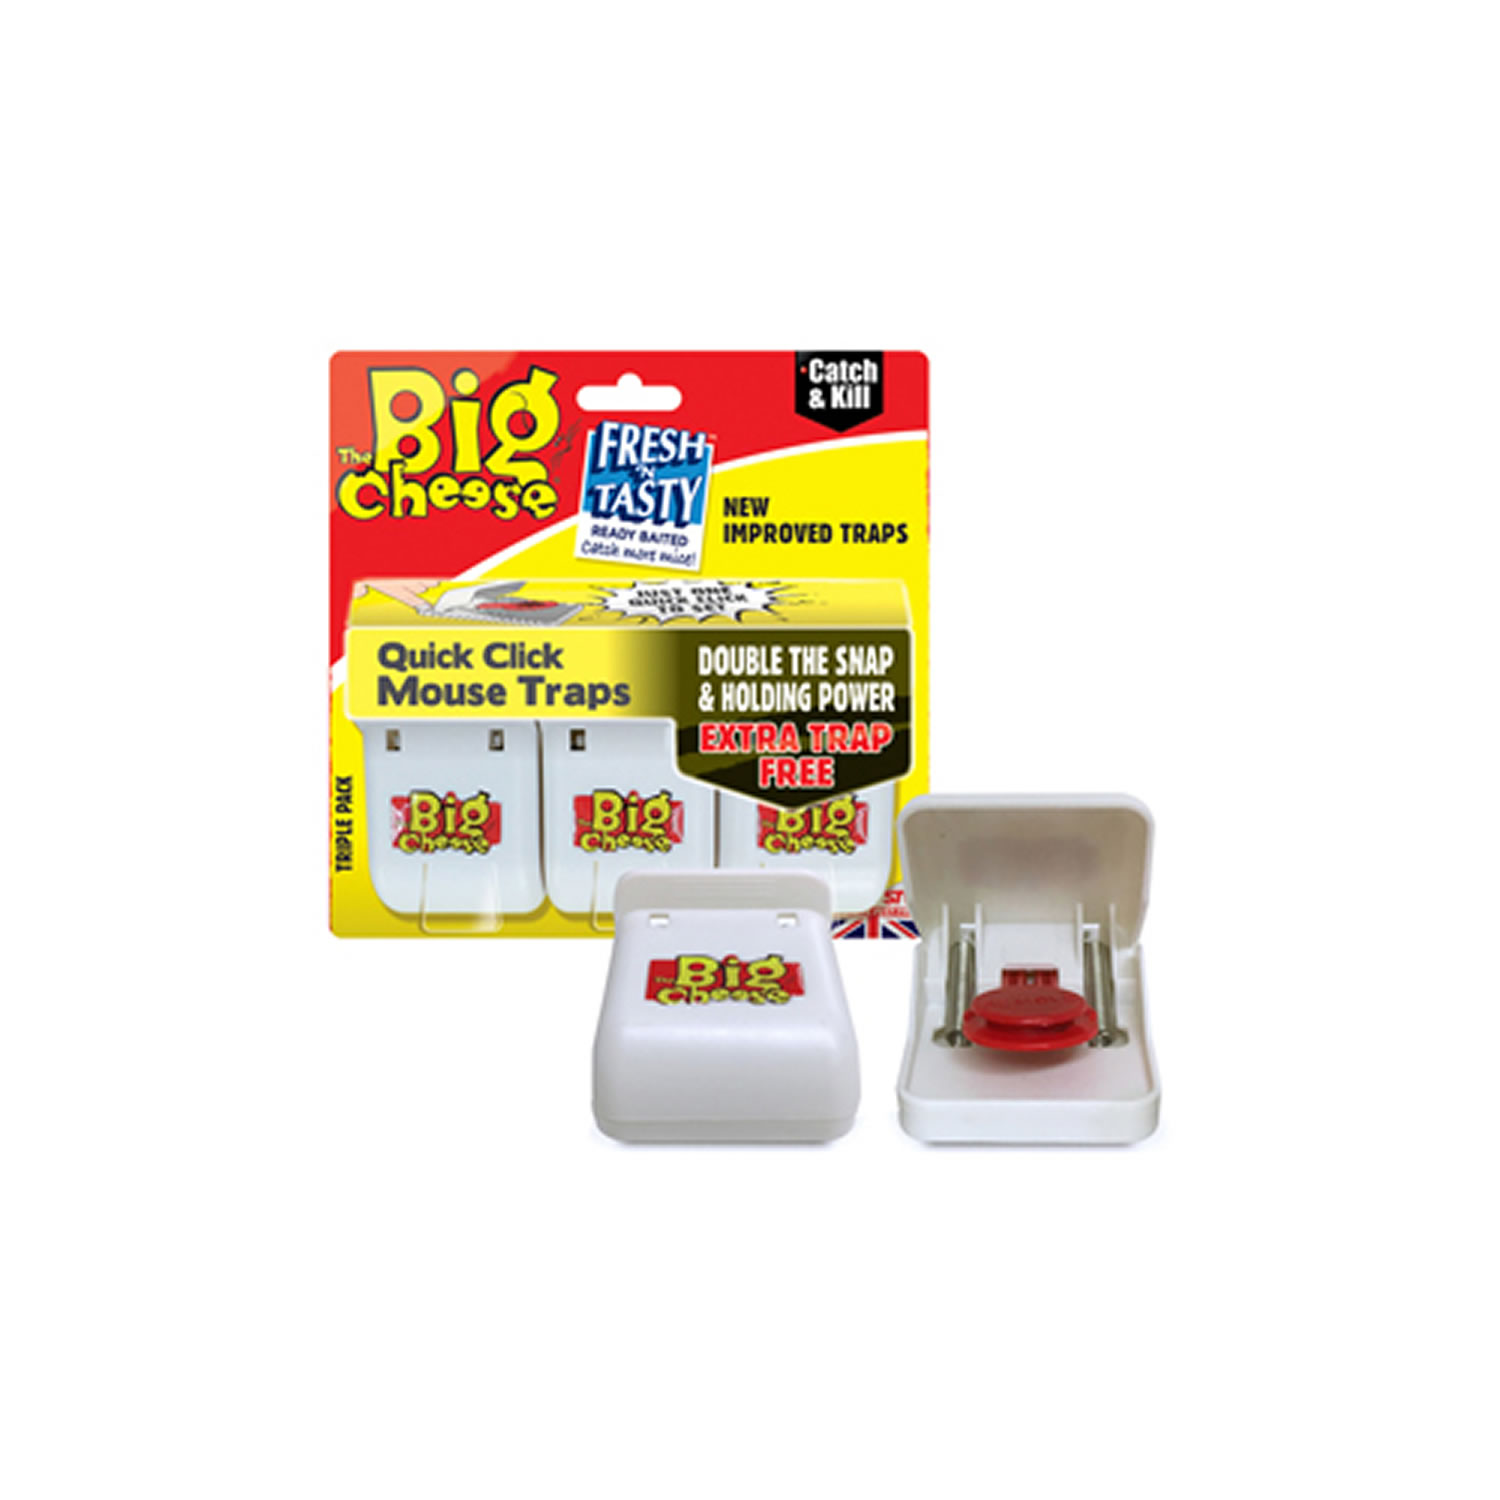 THE BIG CHEESE QUICK CLICK MOUSE TRAP 3 PACK